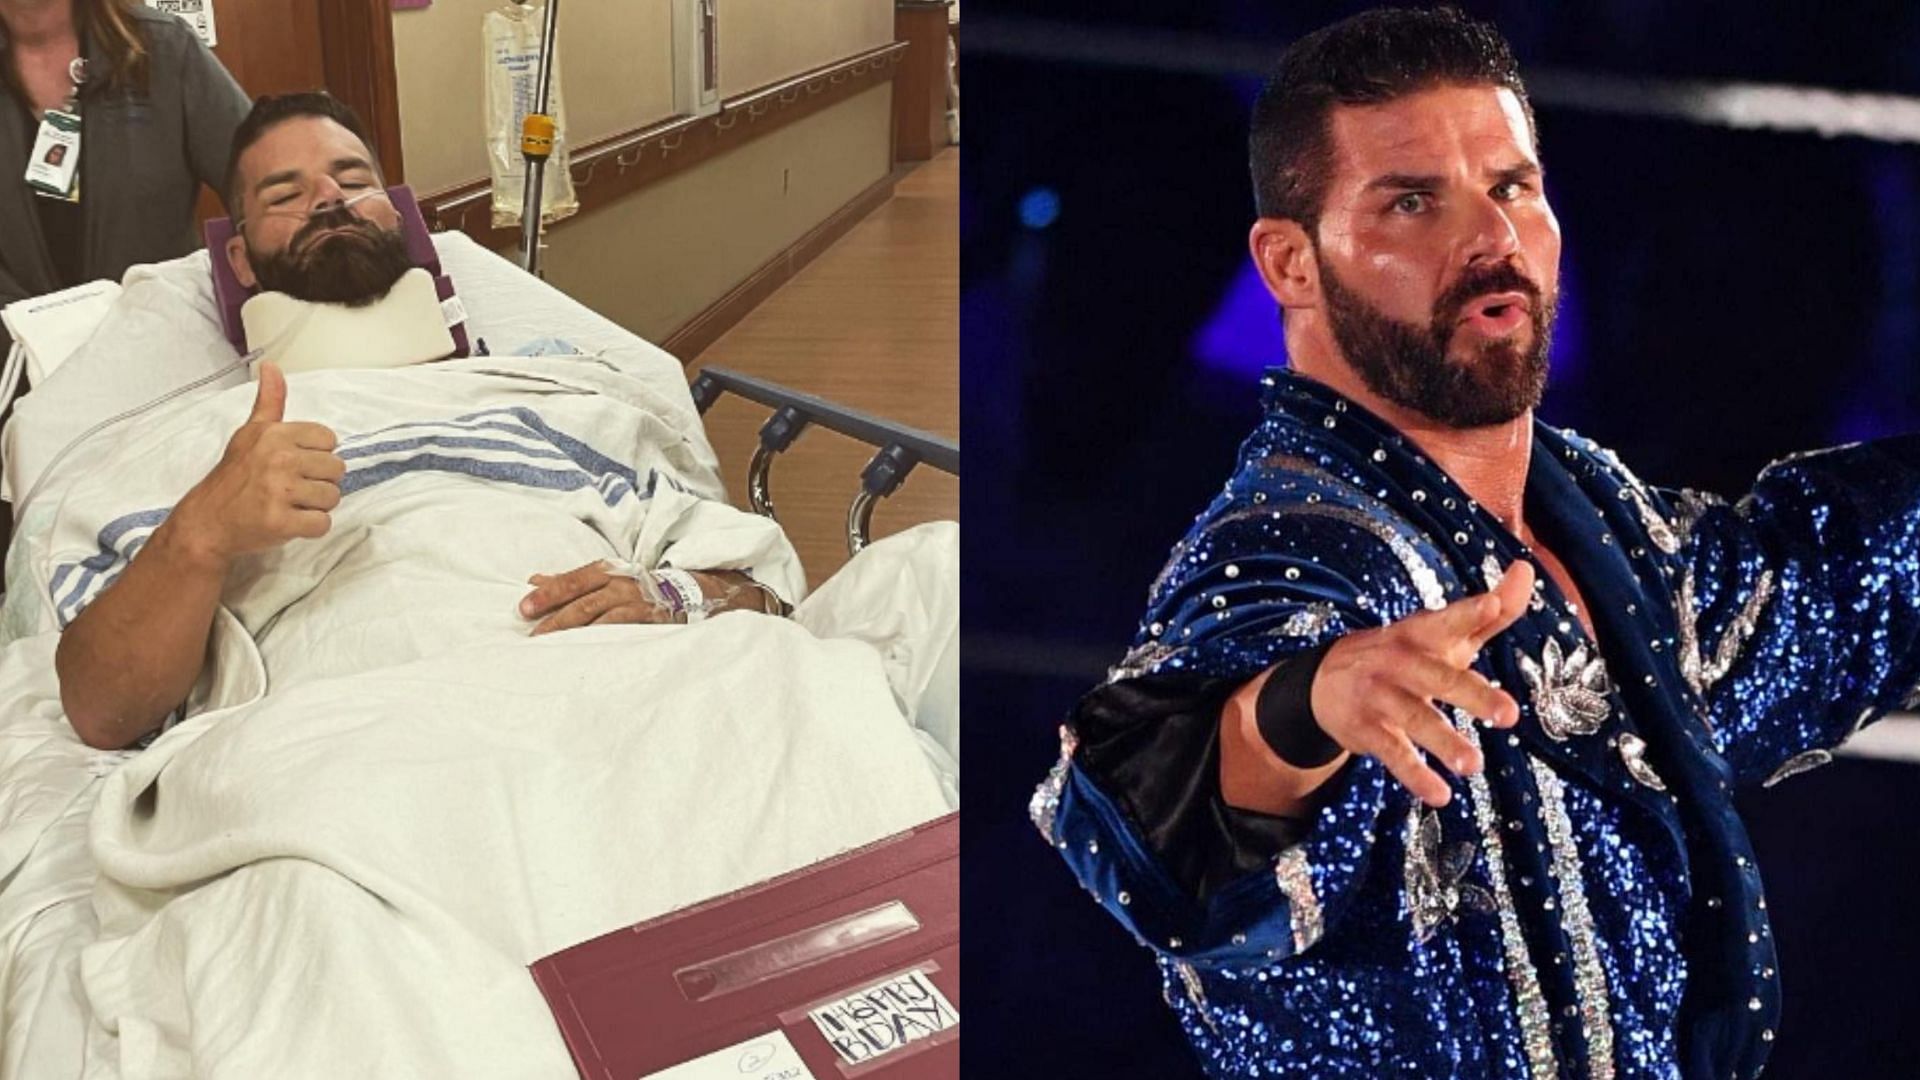 Robert Roode has been out of action for almost a year.